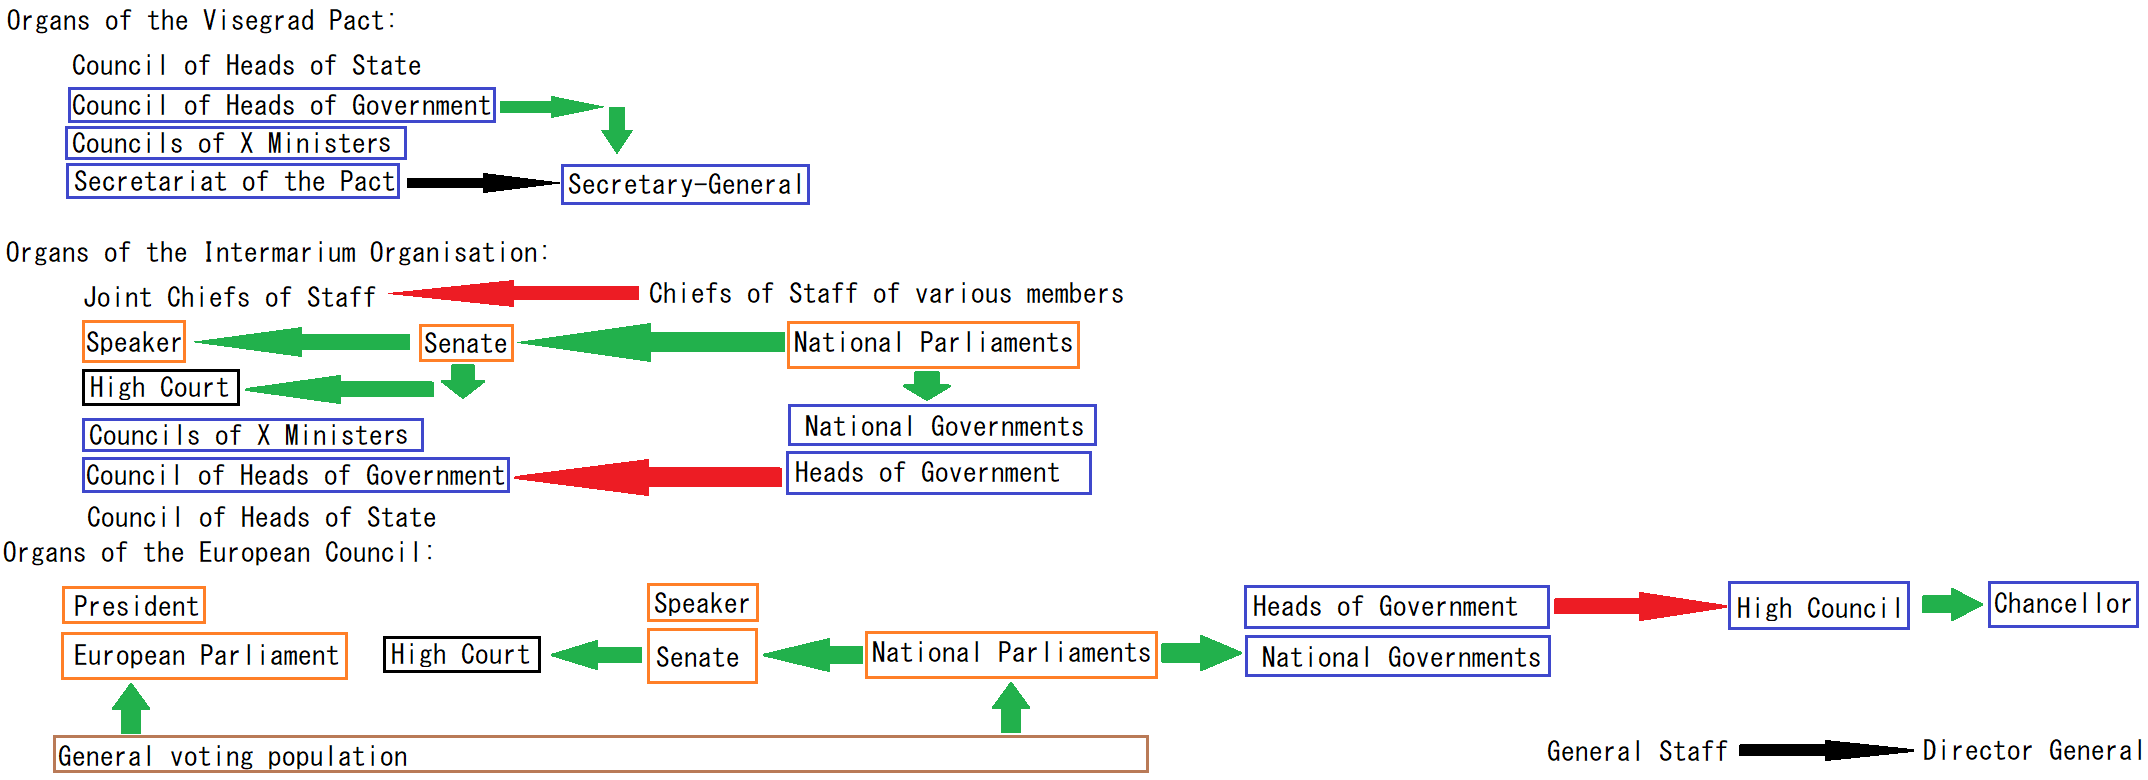 Organisation of European Council and predecessors.png